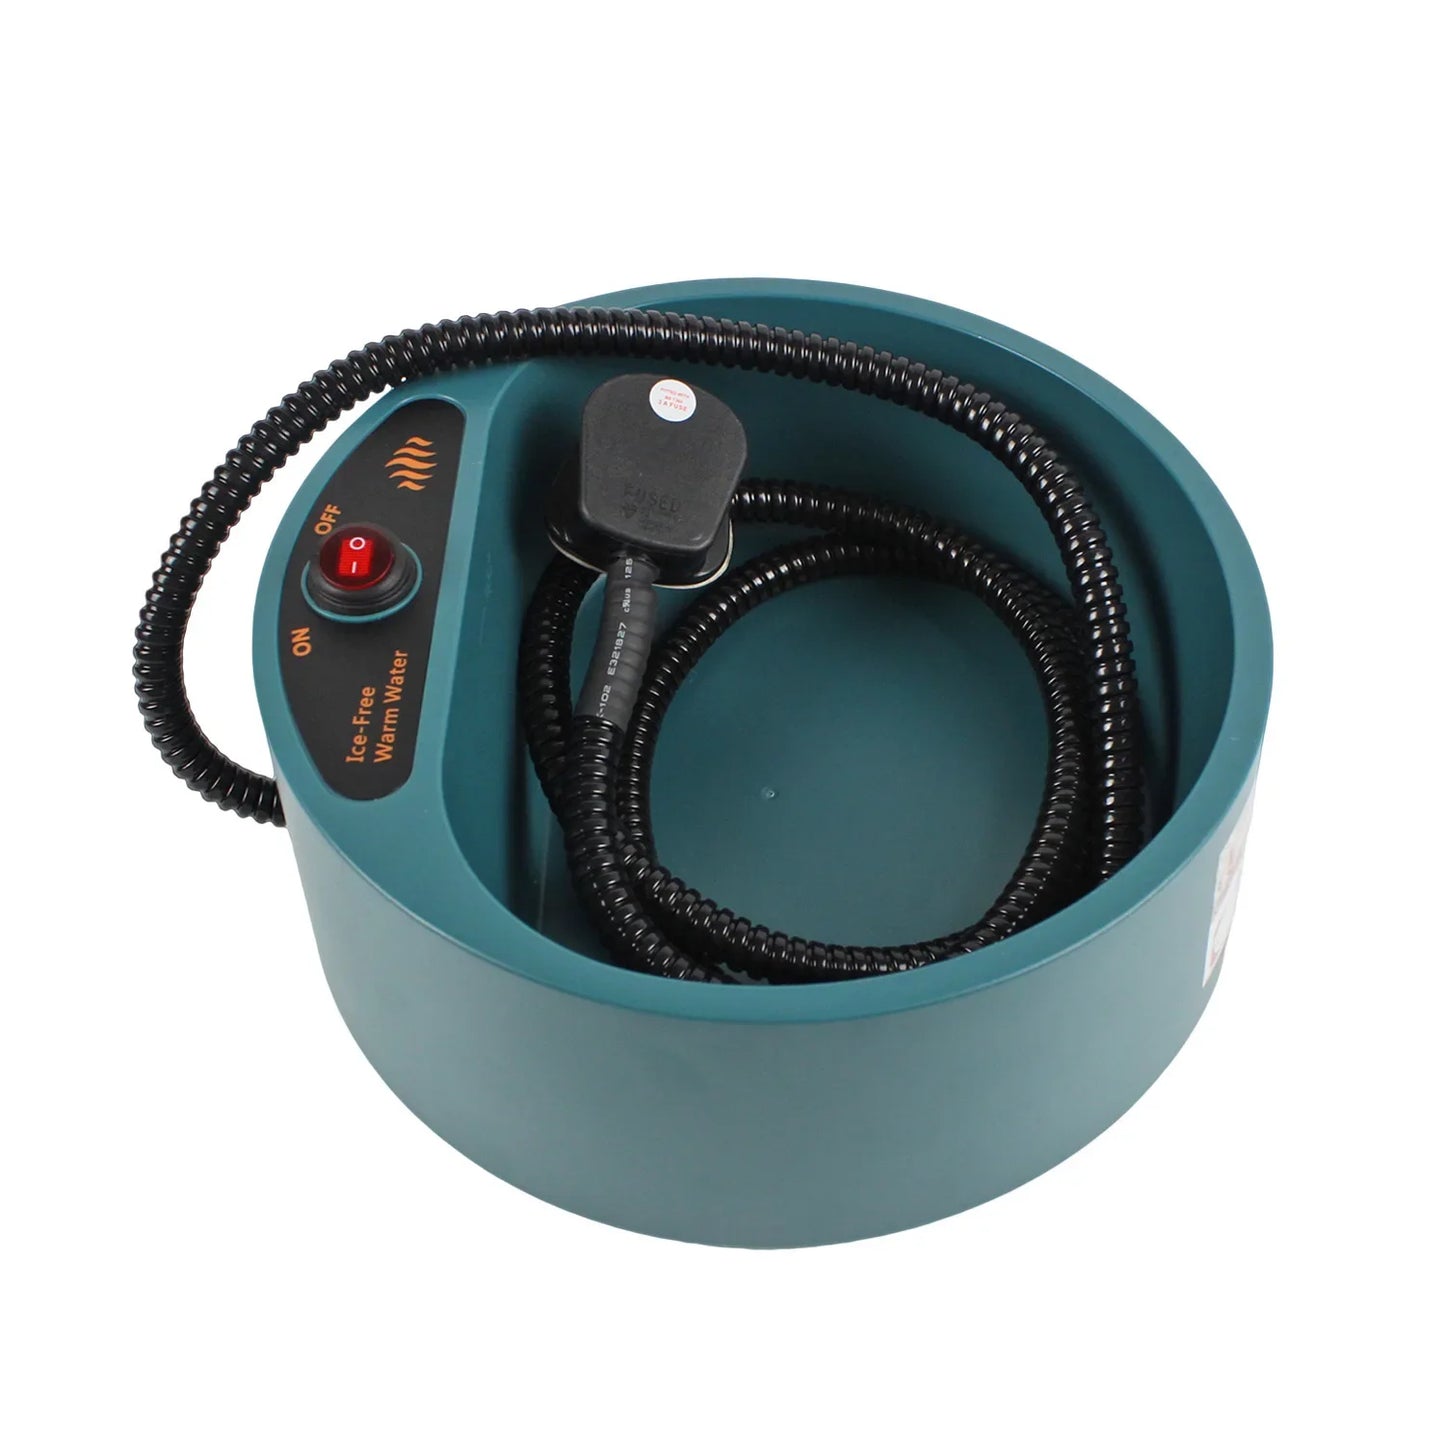 Automatic 2.2L Pet Electric Heating Feeding Feeder Water Bowls Cat Dog Puppy Winter Heated Automatic Constant Temperature Food Container